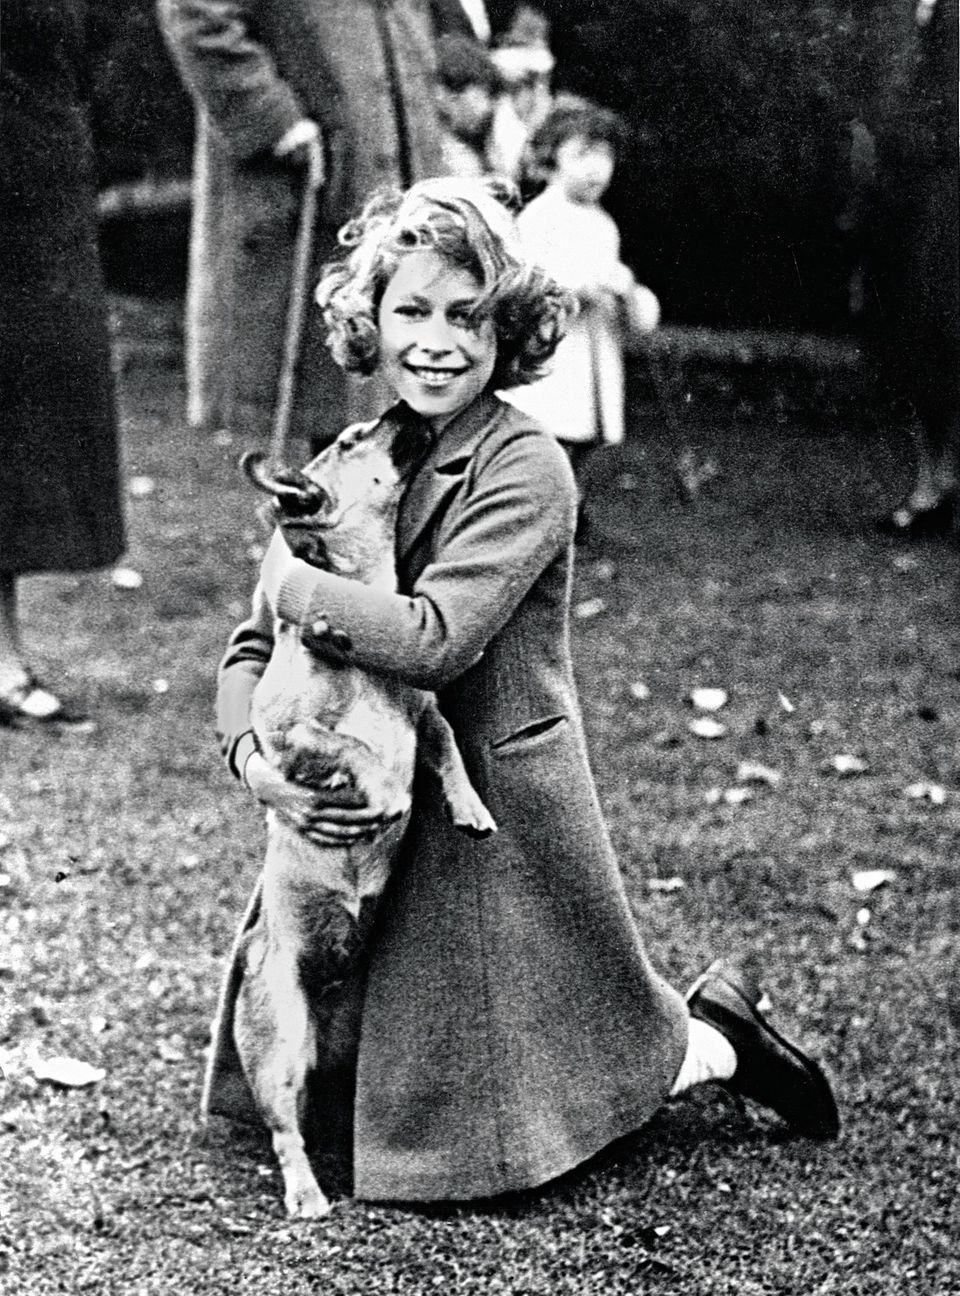 The then princess is eleven years old in this photo, which shows her in 1937 at Glamis Castle, the Scottish castle of her grandparents.  Elizabeth's father has just been crowned.  Since then, she herself is no longer just a little girl.  But heir to the throne